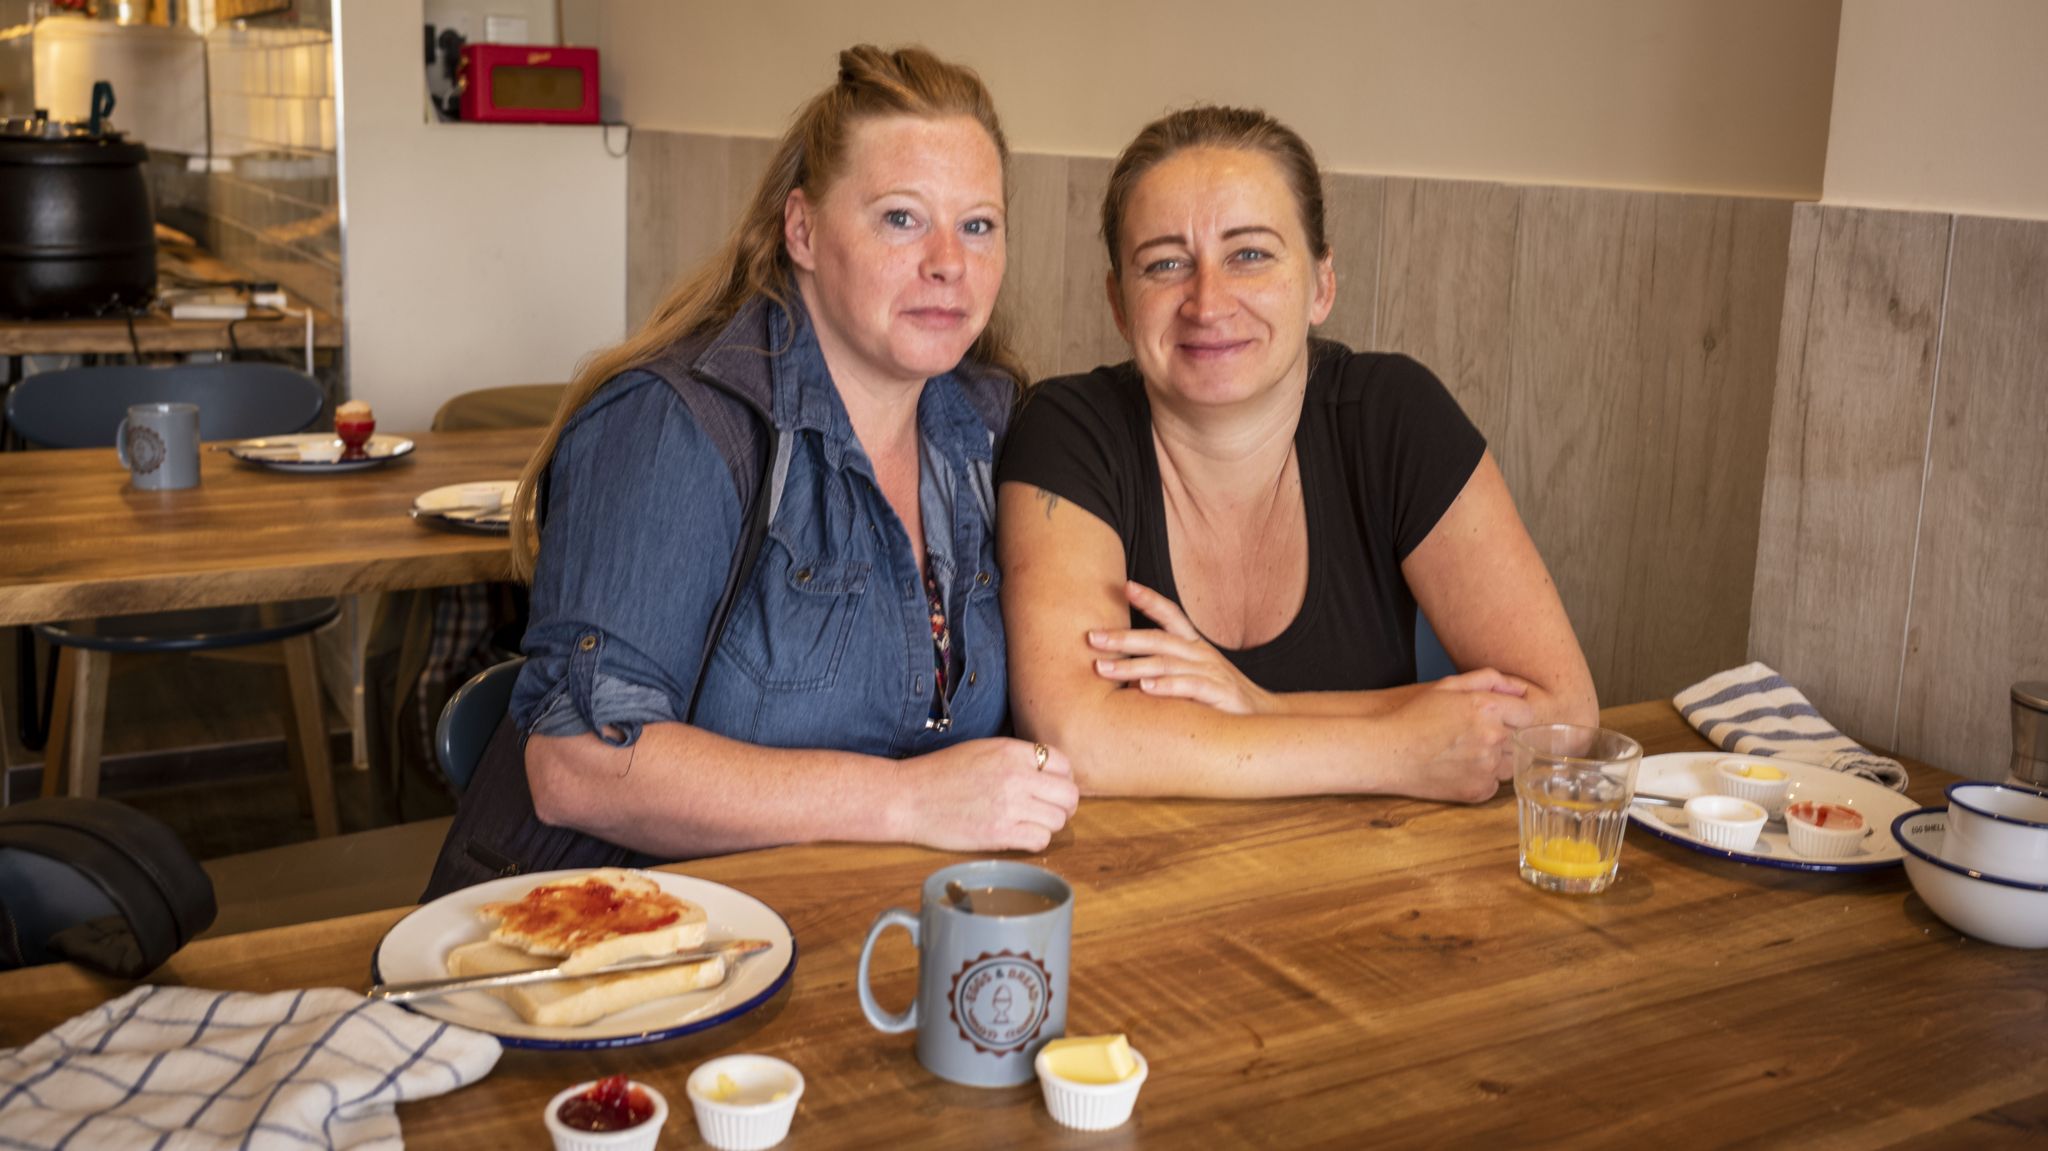 Julie and Kate are regulars at Egg & Bread